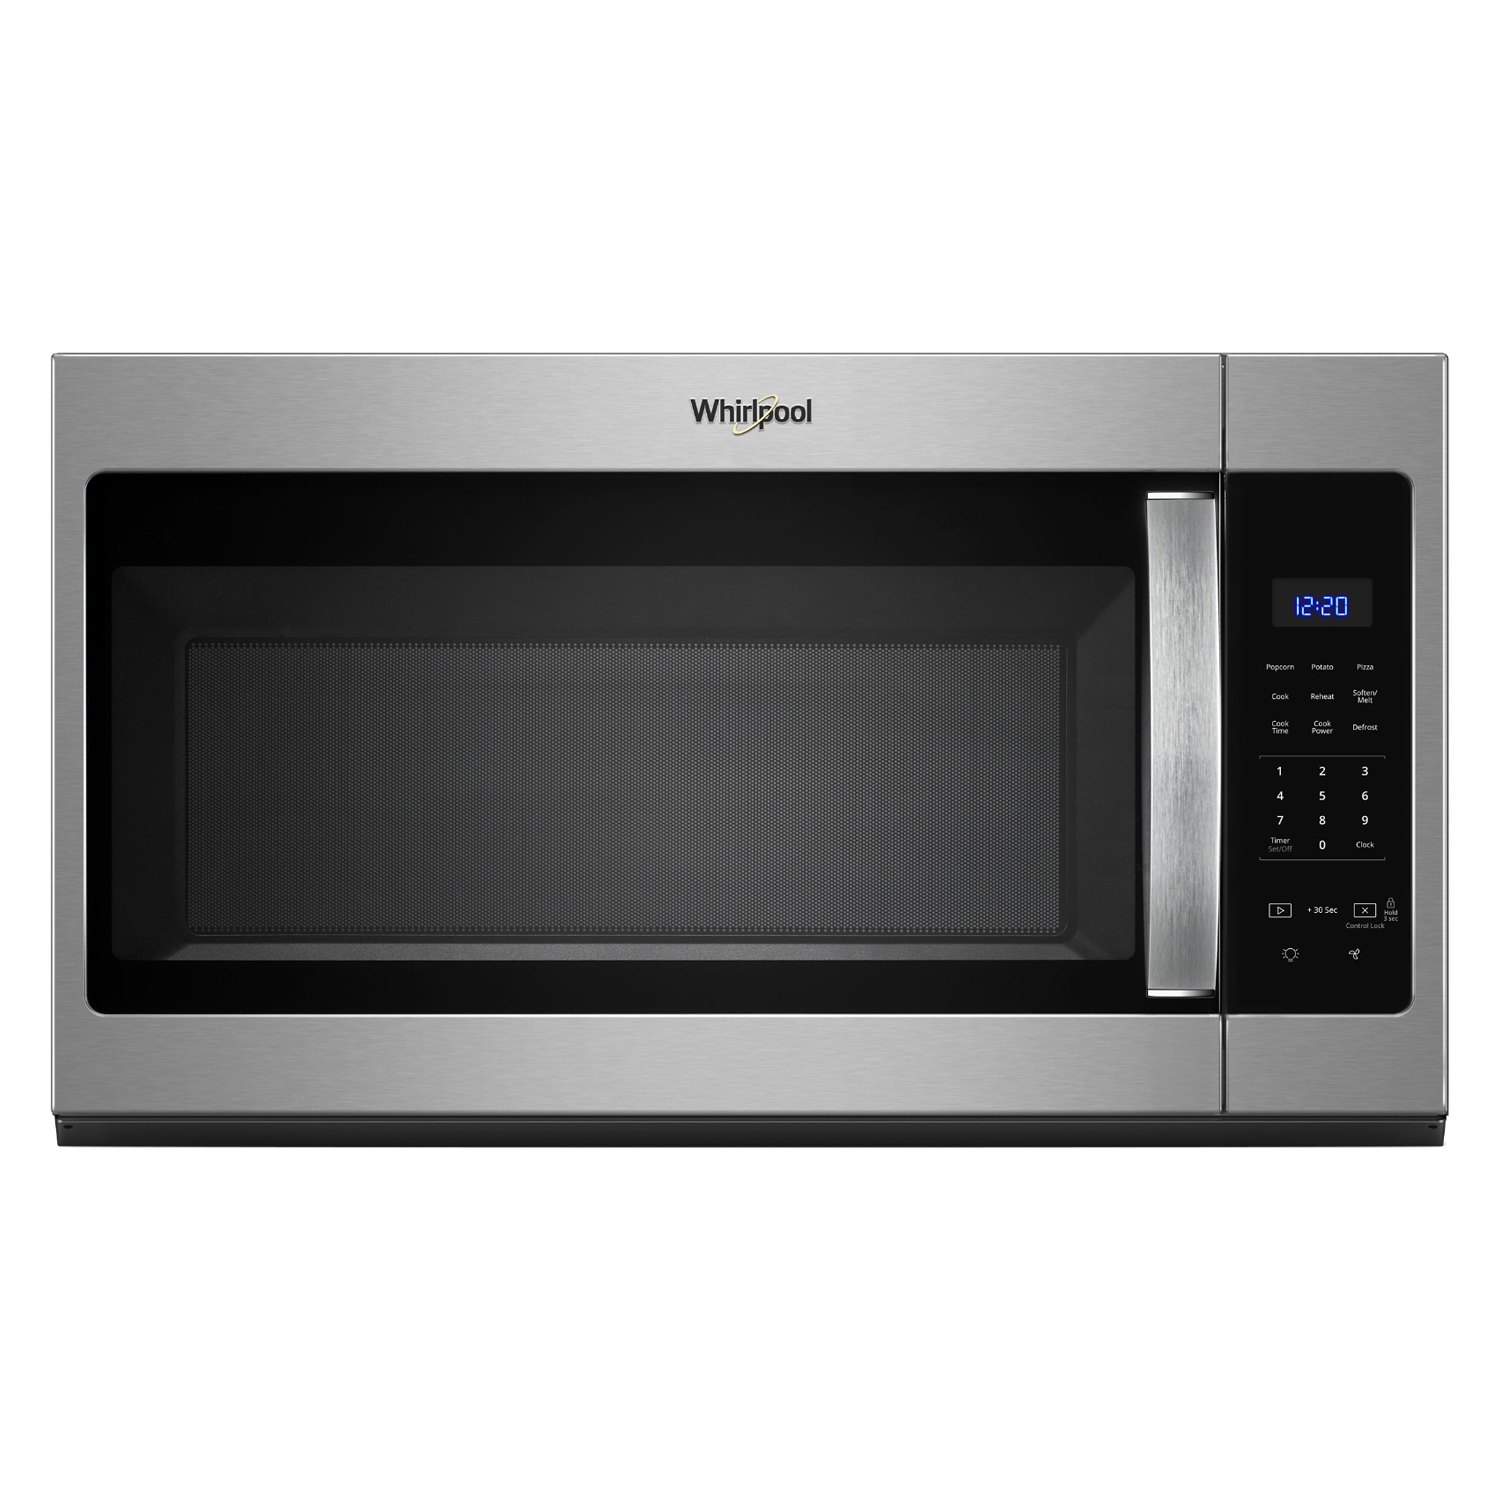 Whirlpool® WMH31017HS - 1.7 cu.ft 1000W Gray Countertop Microwave with